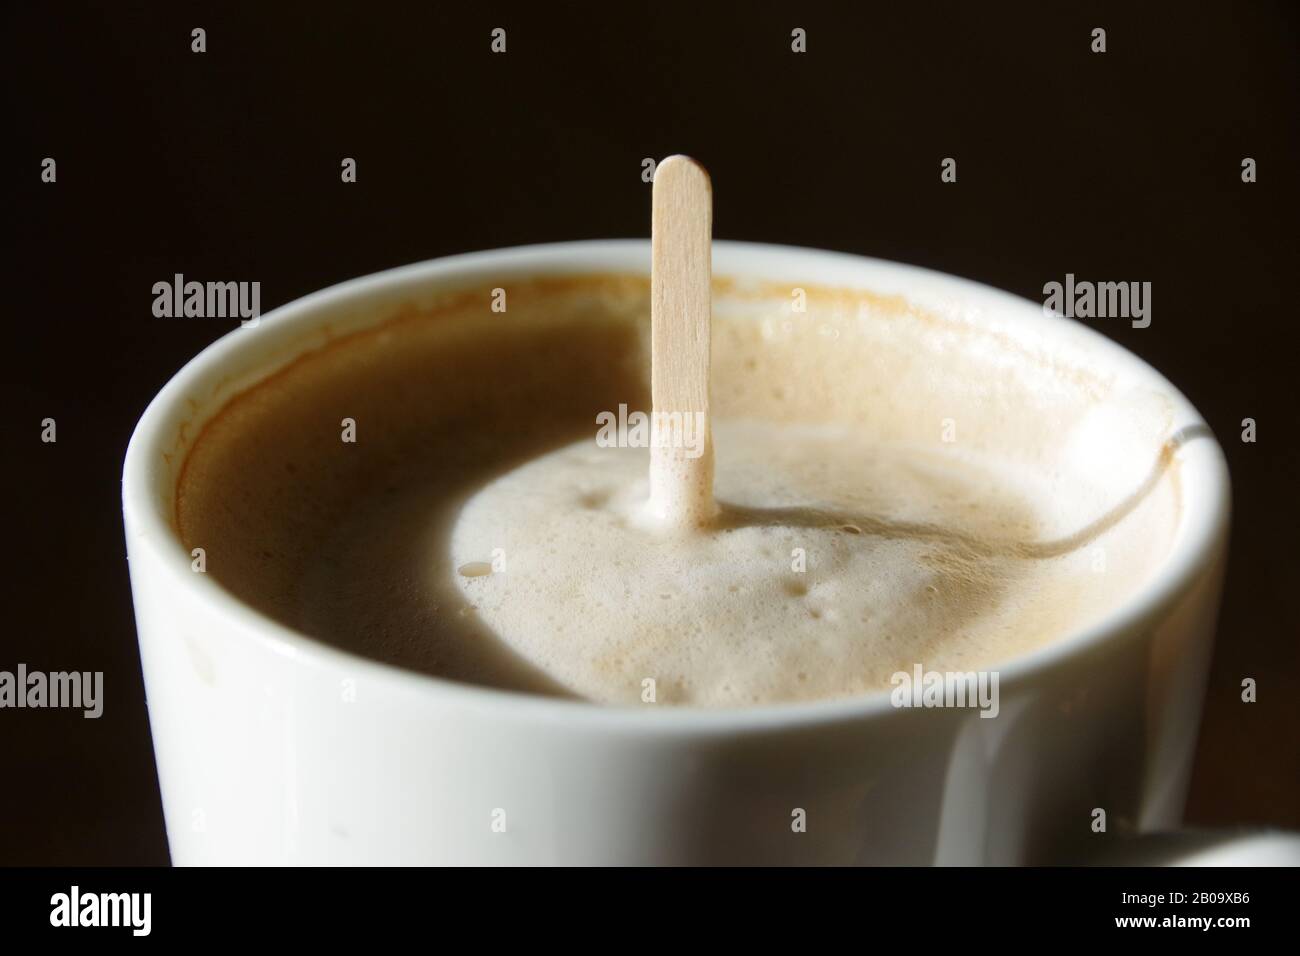 Creamy coffee, with stirring stick standing up in it Stock Photo